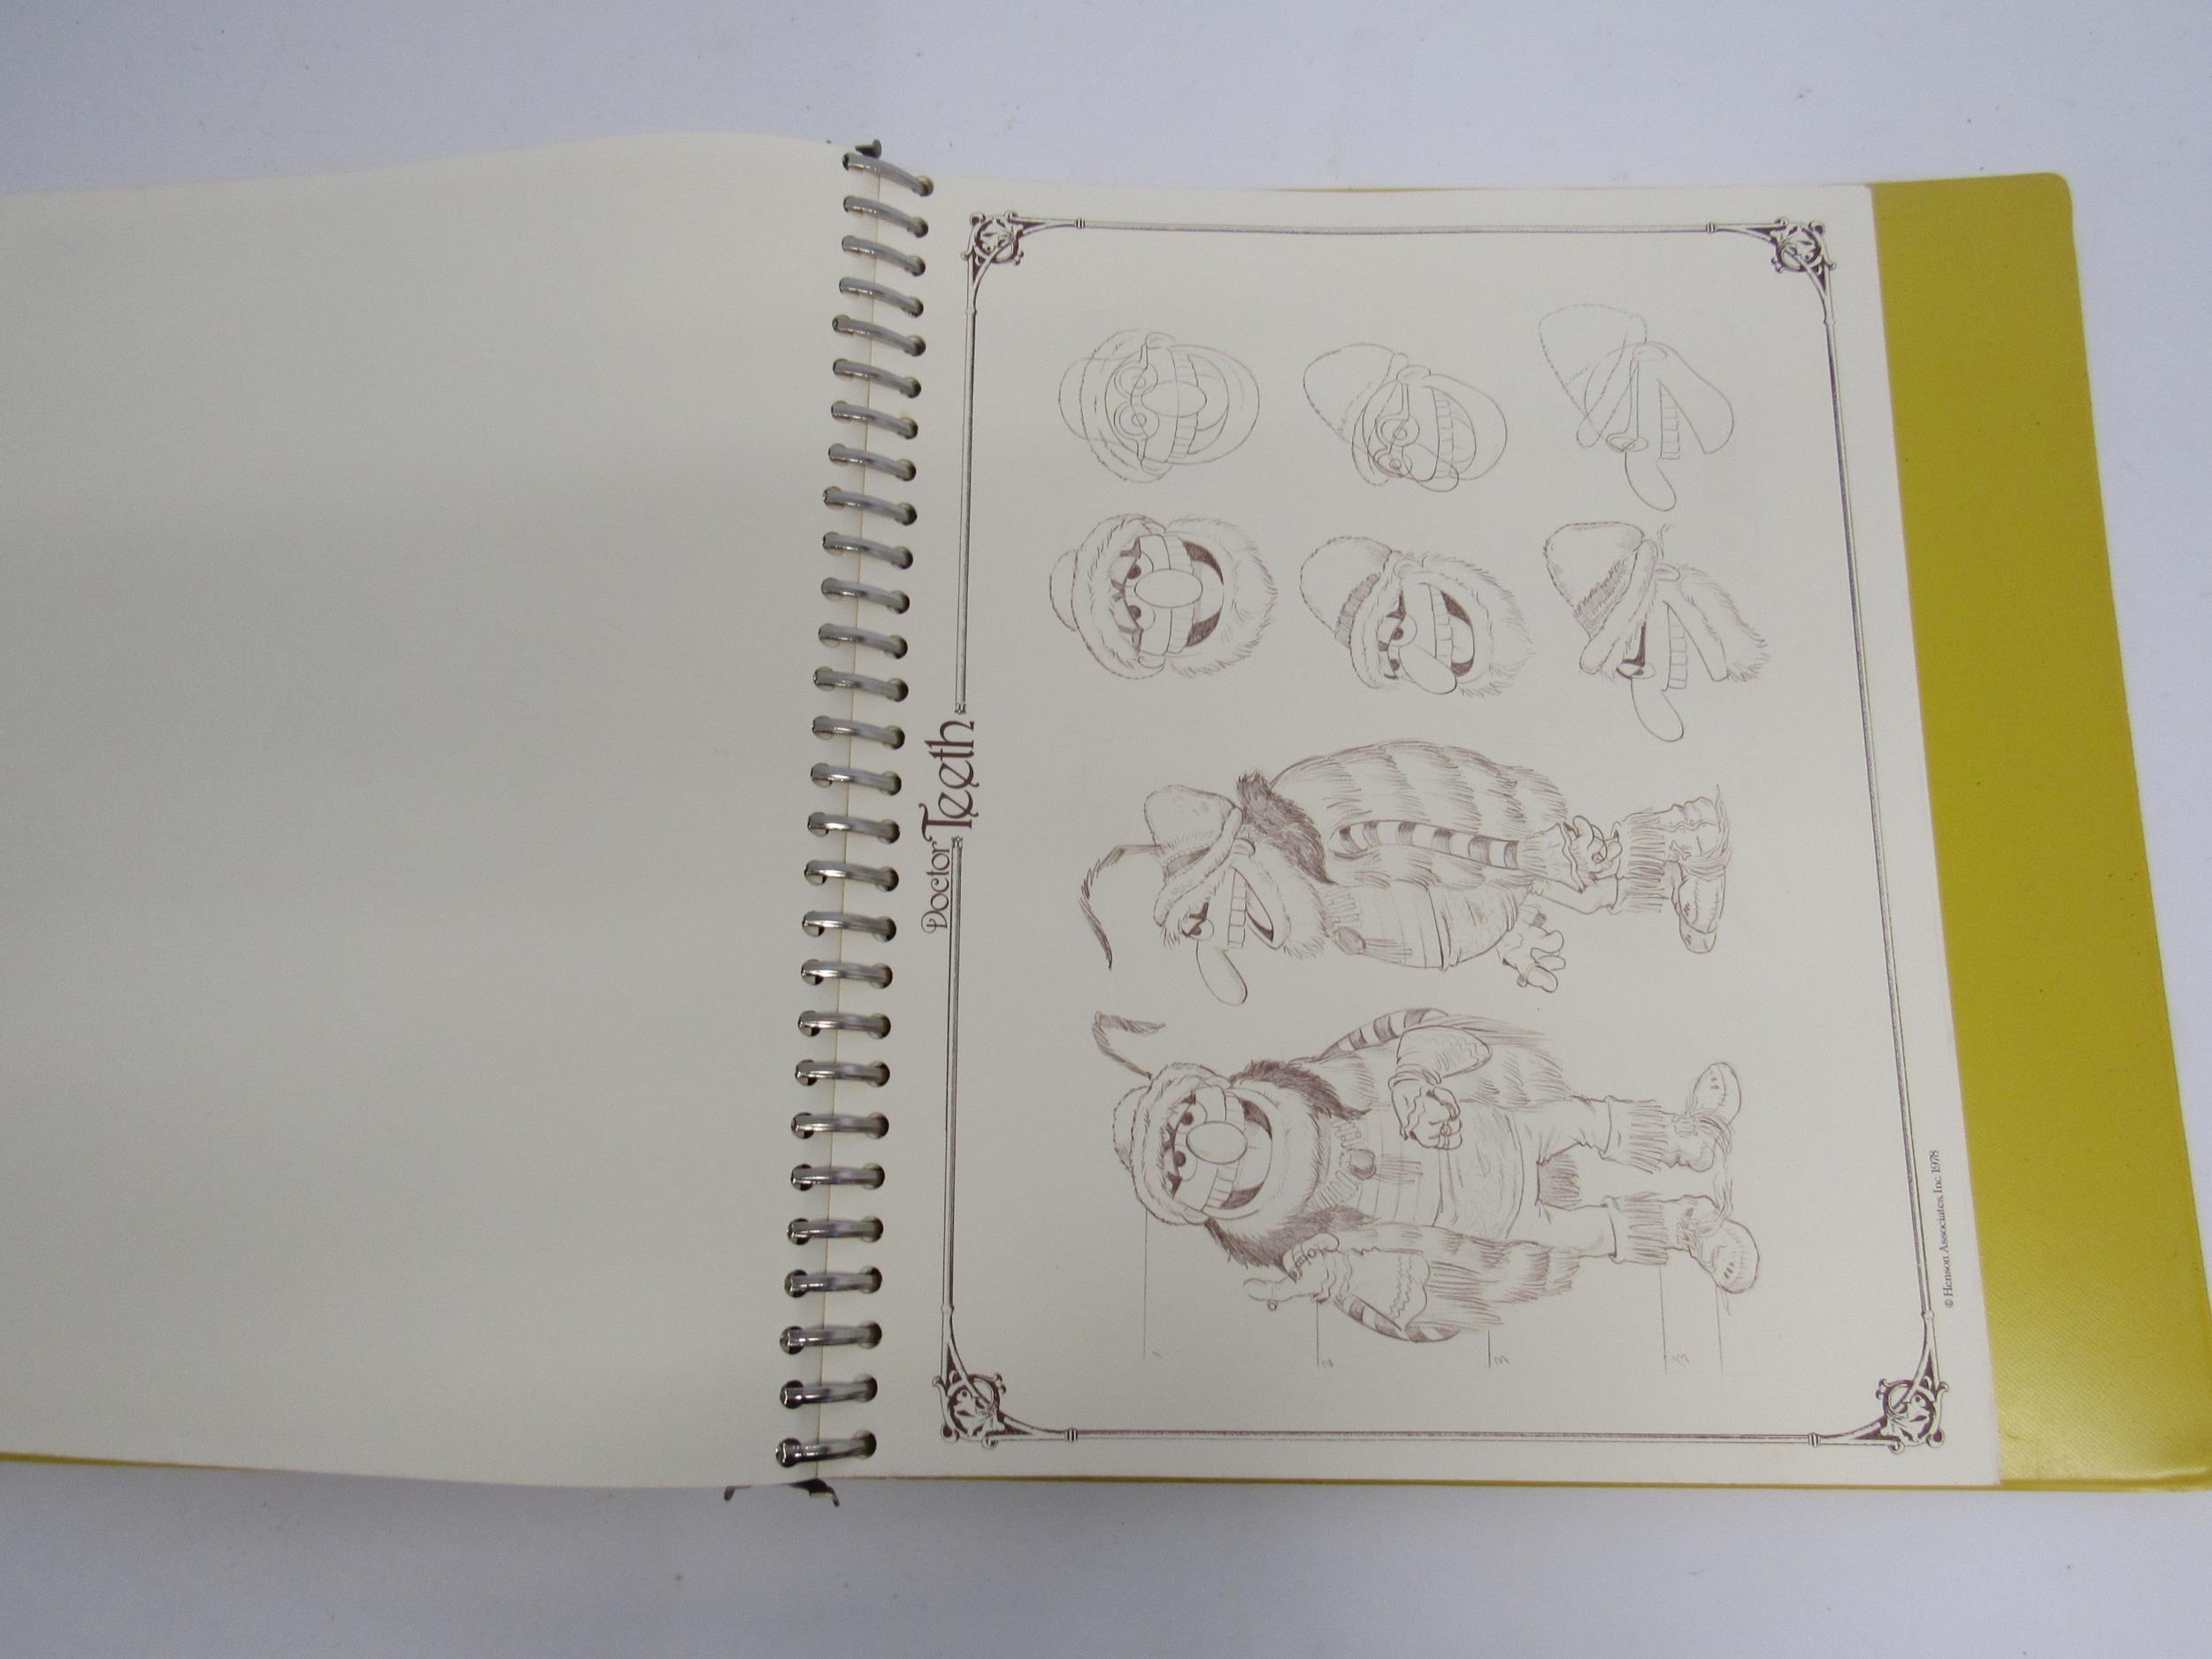 'The Muppet Show Style Book', book of style guides and character motifs for The Muppets, distributed - Image 6 of 9